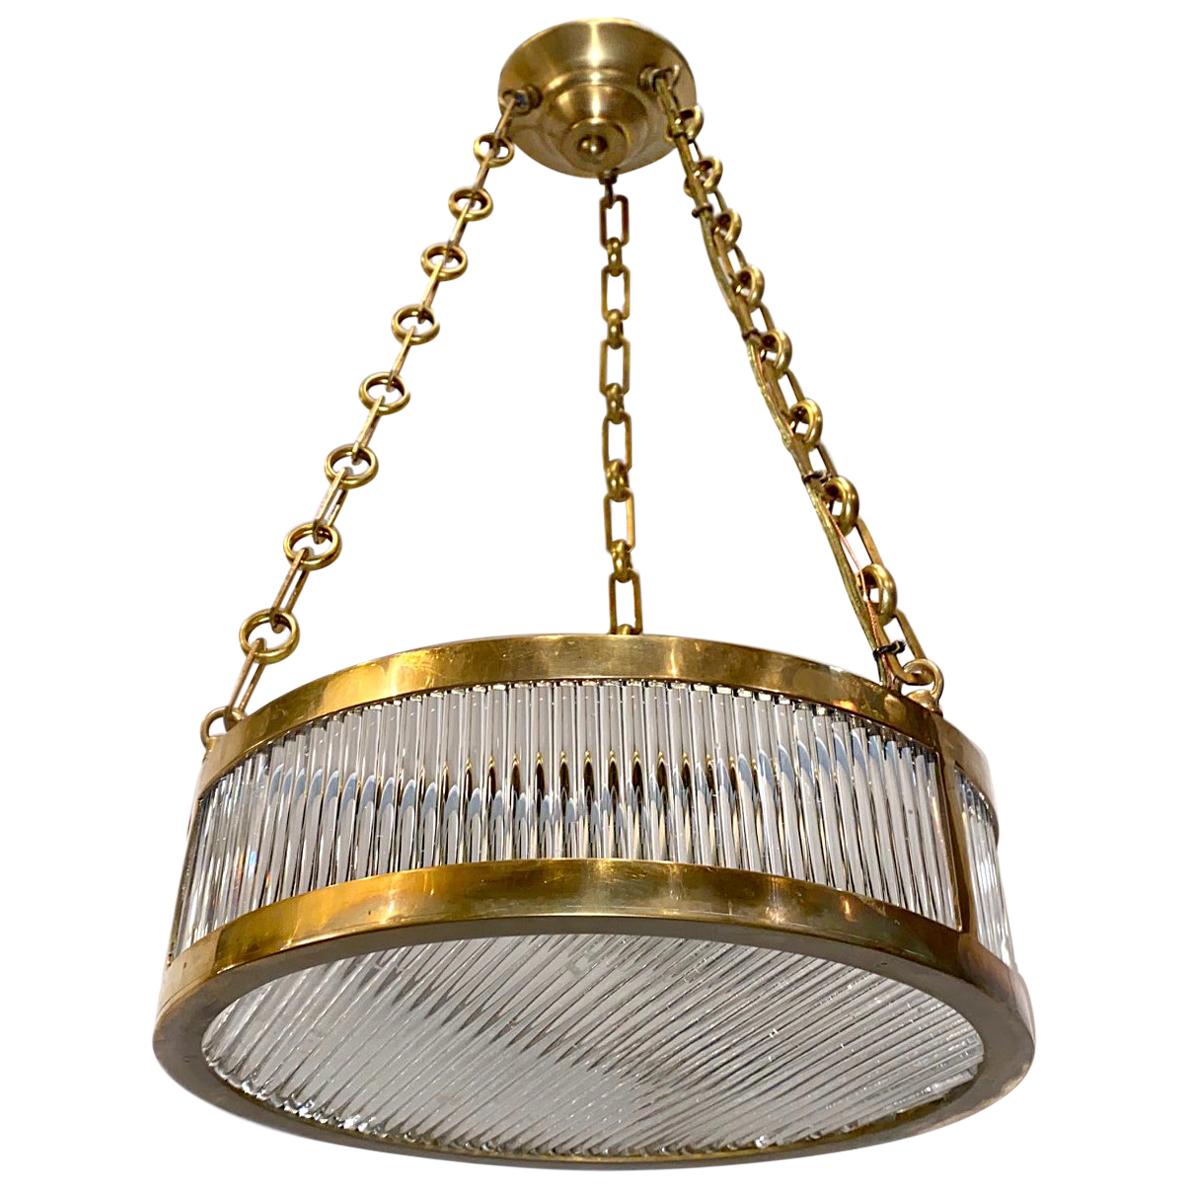 Set of French Bronze Glass Rods Fixtures, Sold Individually